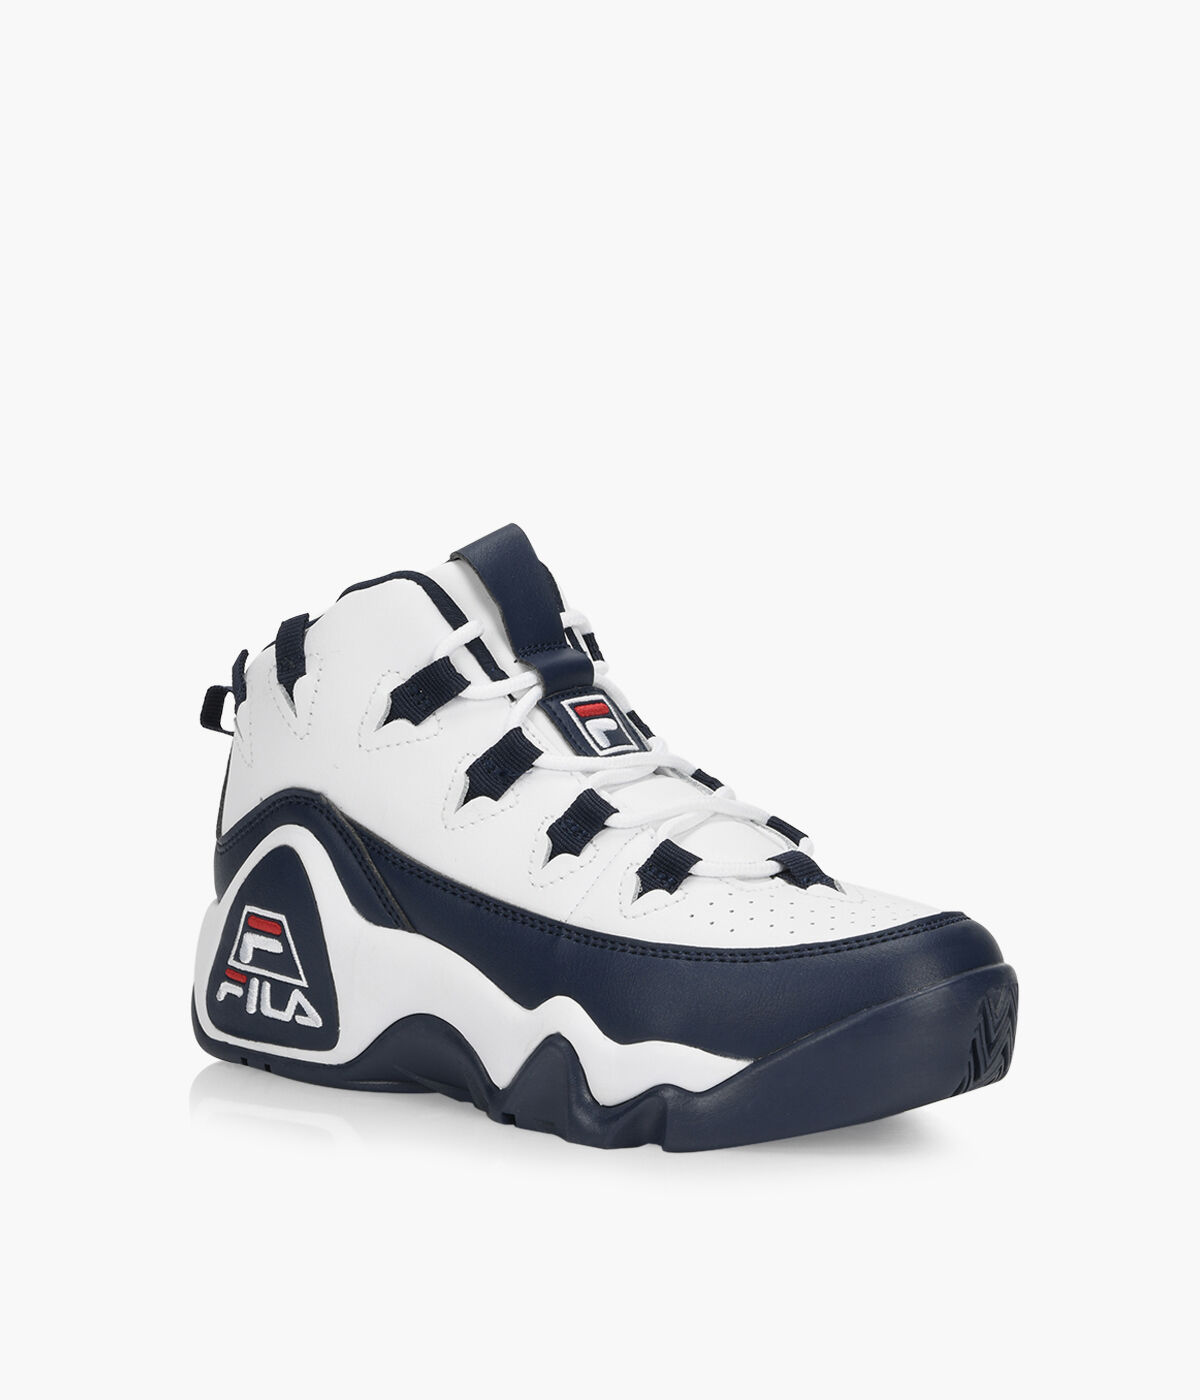 grant hill 1 shoes